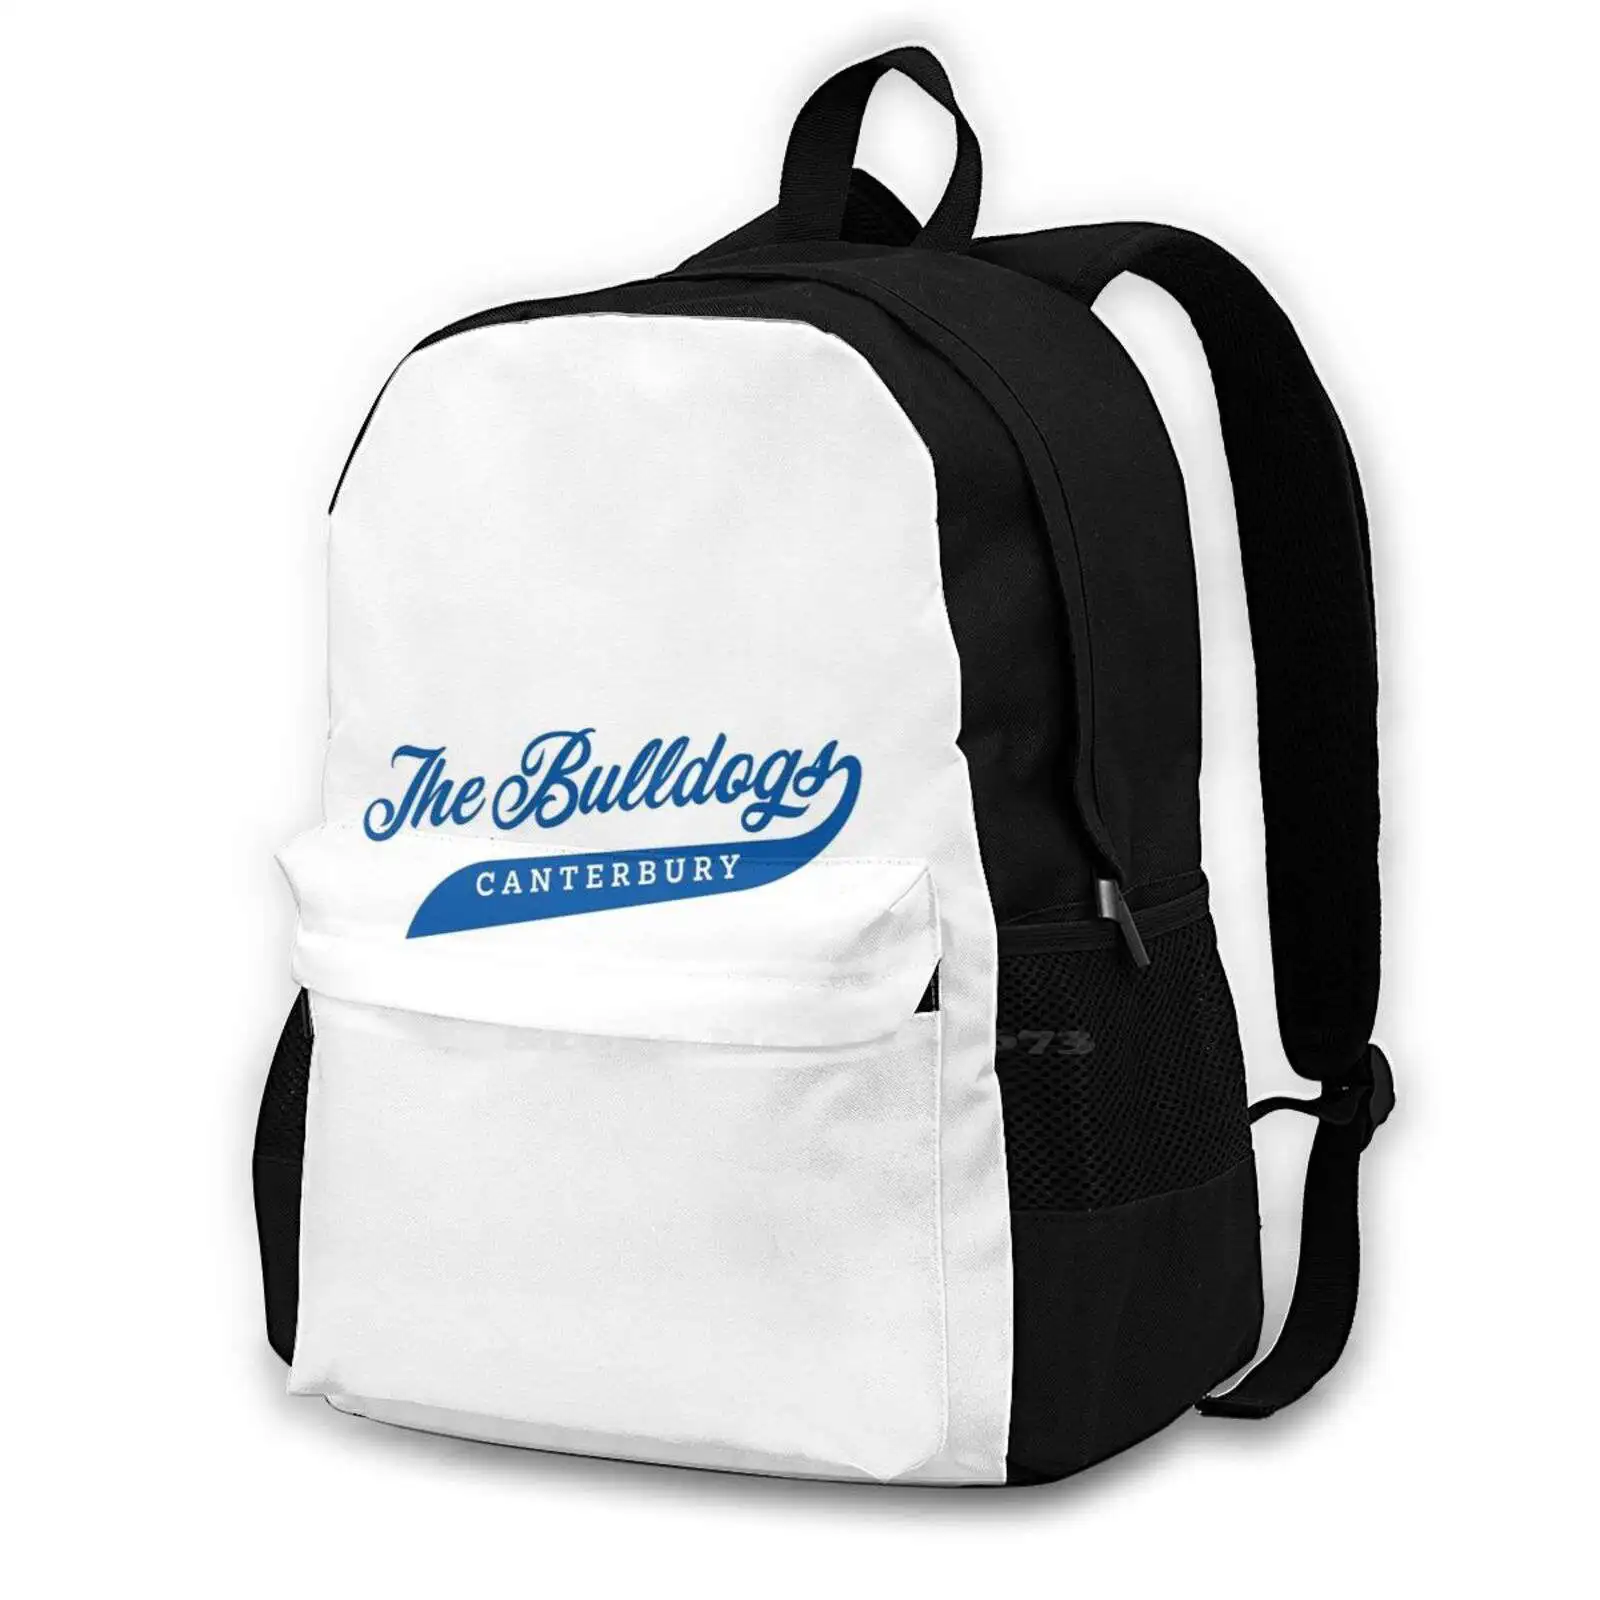 

The Bulldogs - Caterbury Backpack For Student School Laptop Travel Bag Nrl National Rugby League Aussie Australia Aus Footy